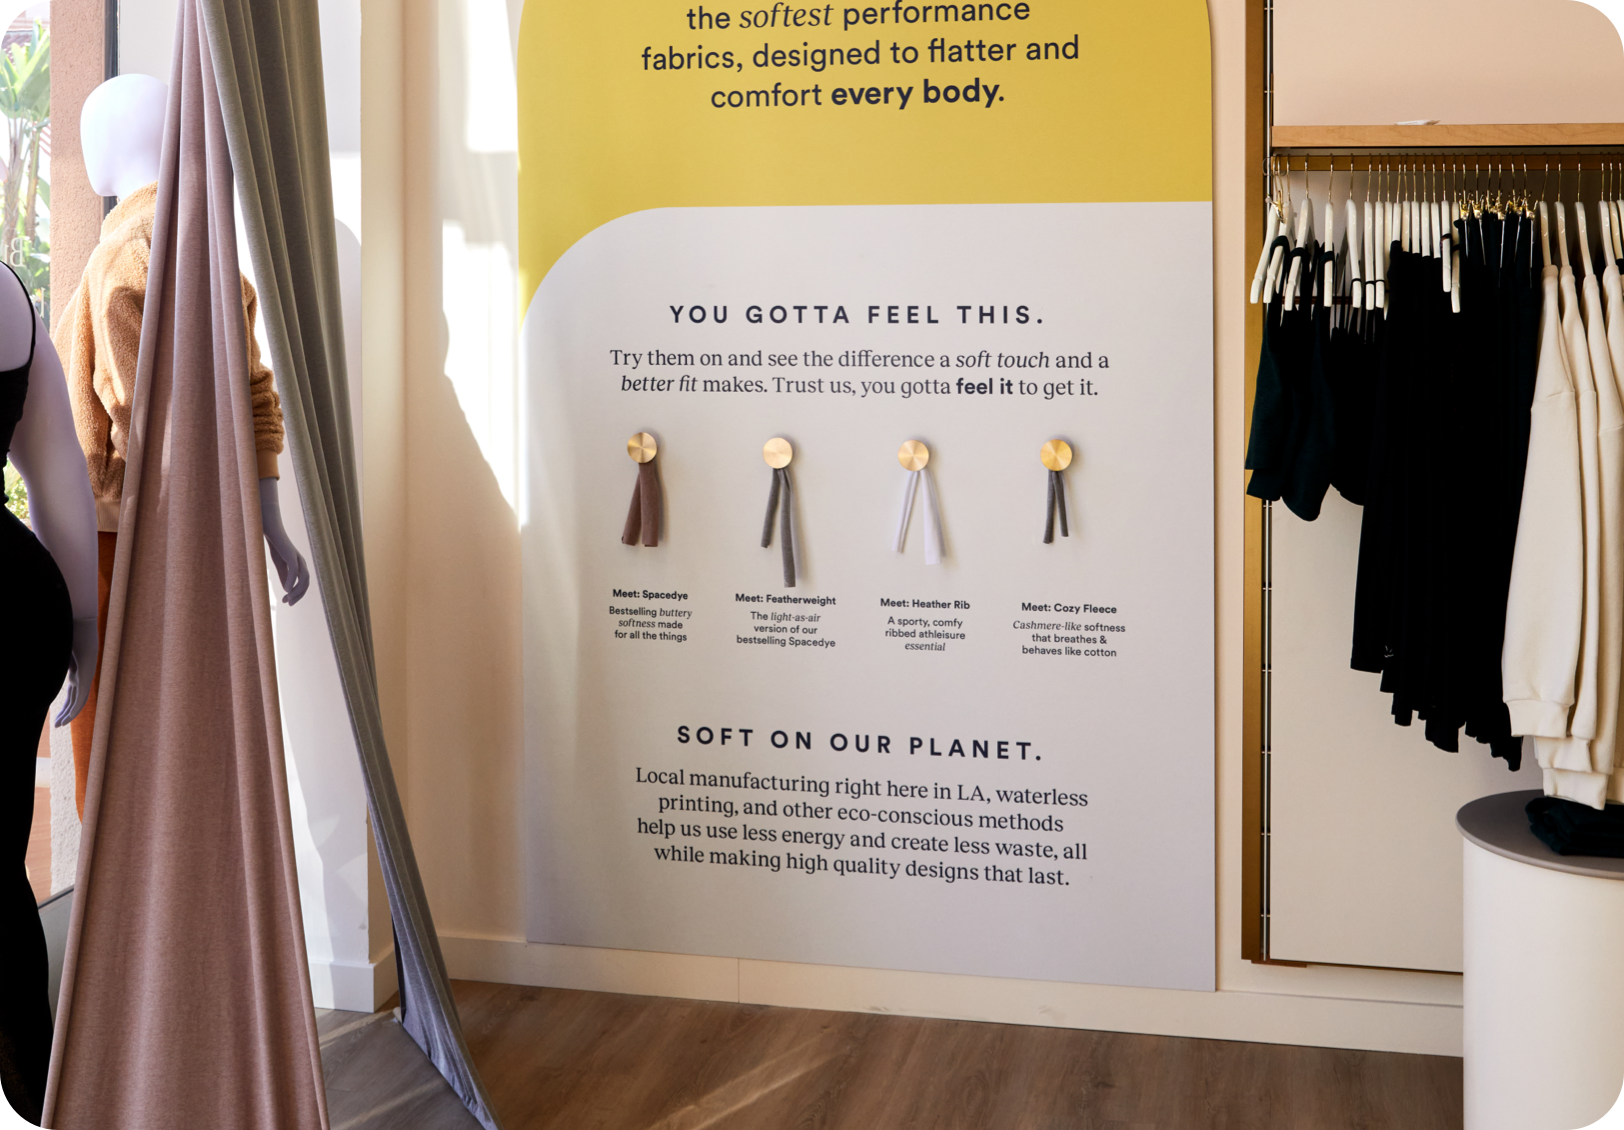 Fabric info wall - education on various fabrics and sustainability